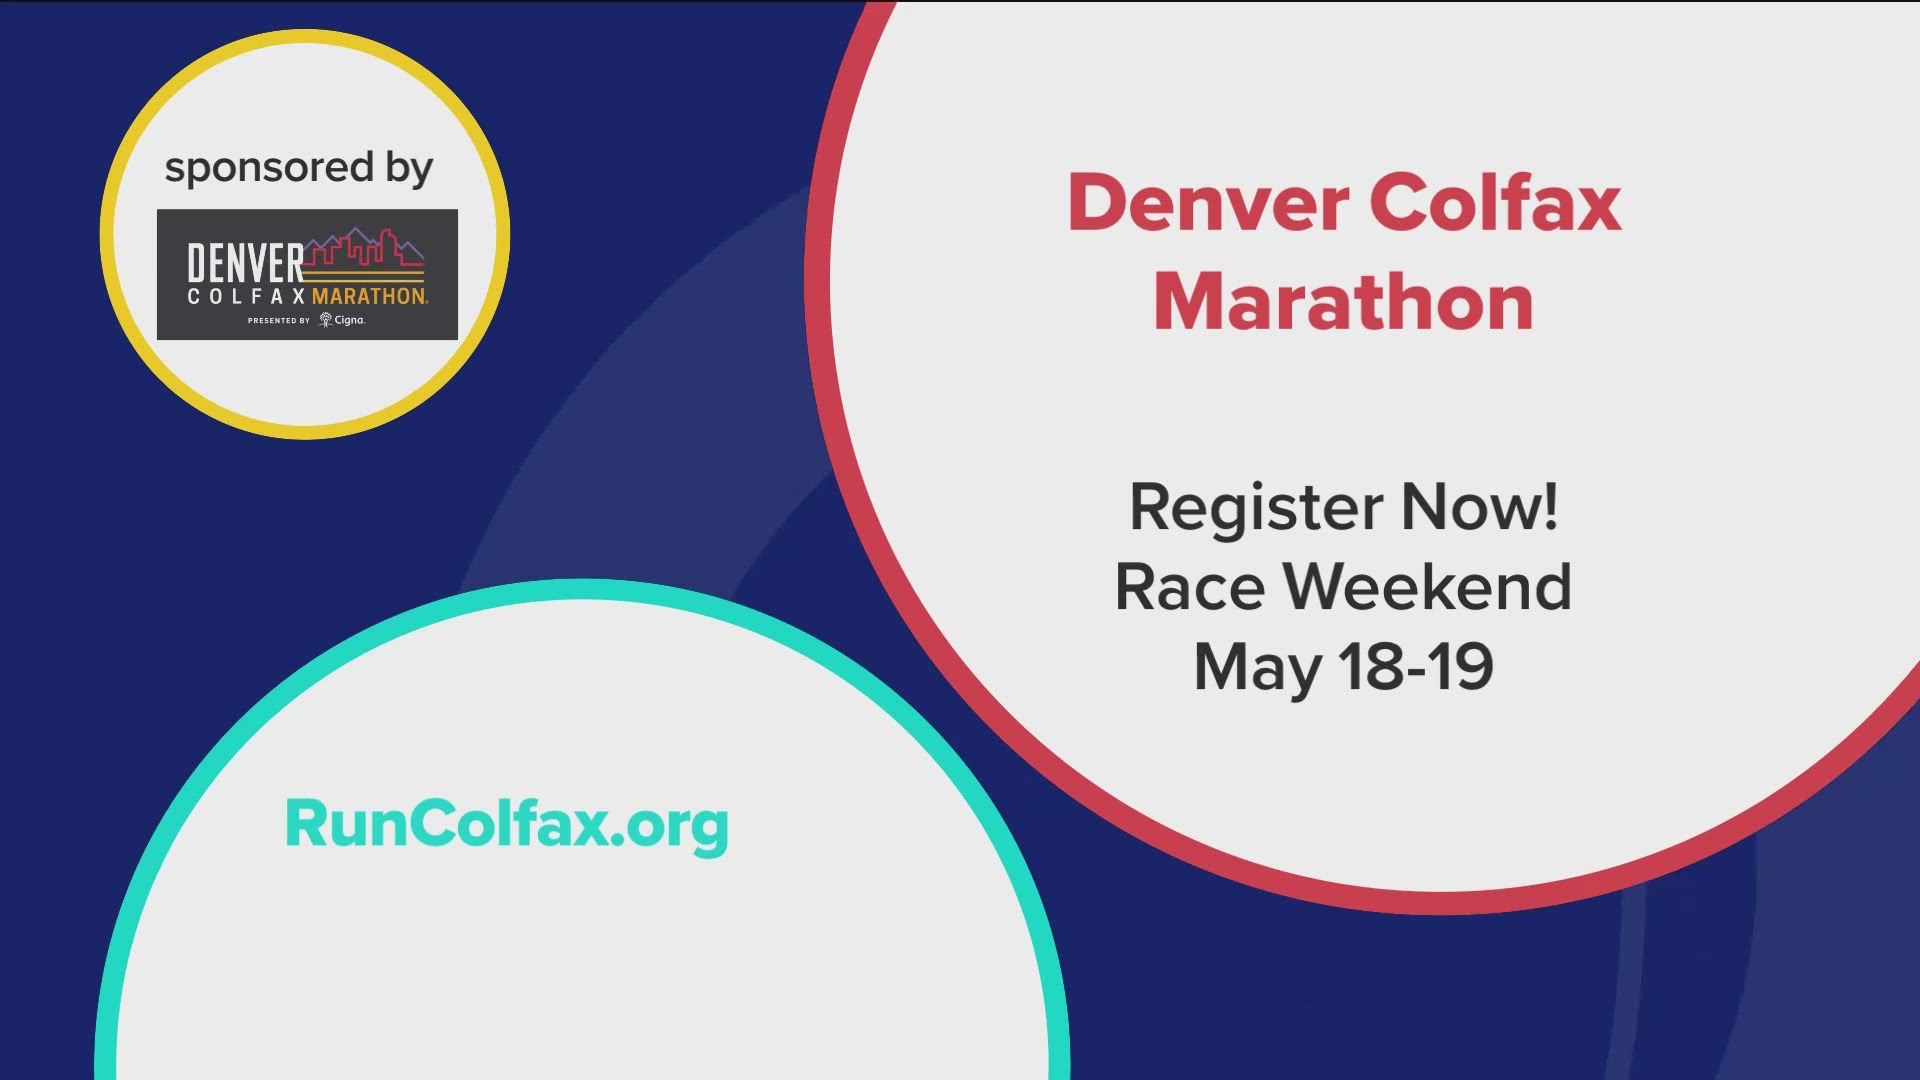 Sign up for the Colfax Marathon now--spots are filling up fast! Find your race at RunColfax.org. **PAID CONTENT**